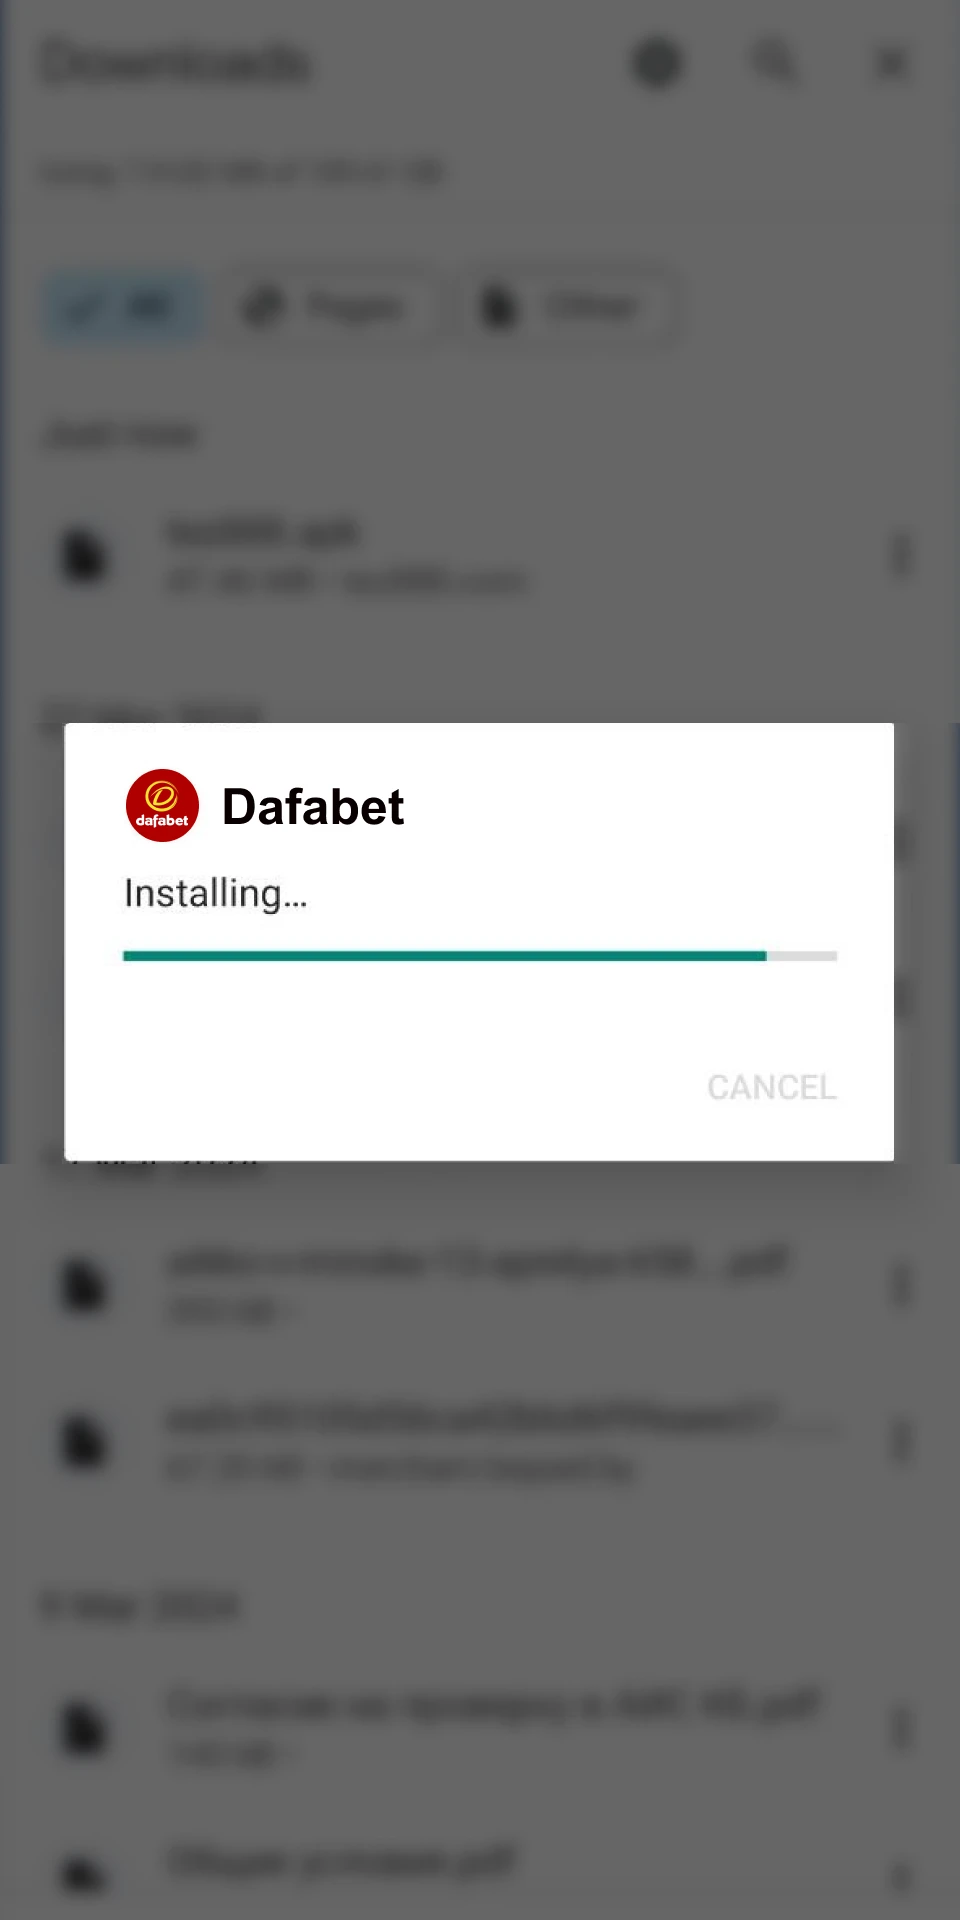 Download and install the Dafabet app from their website.